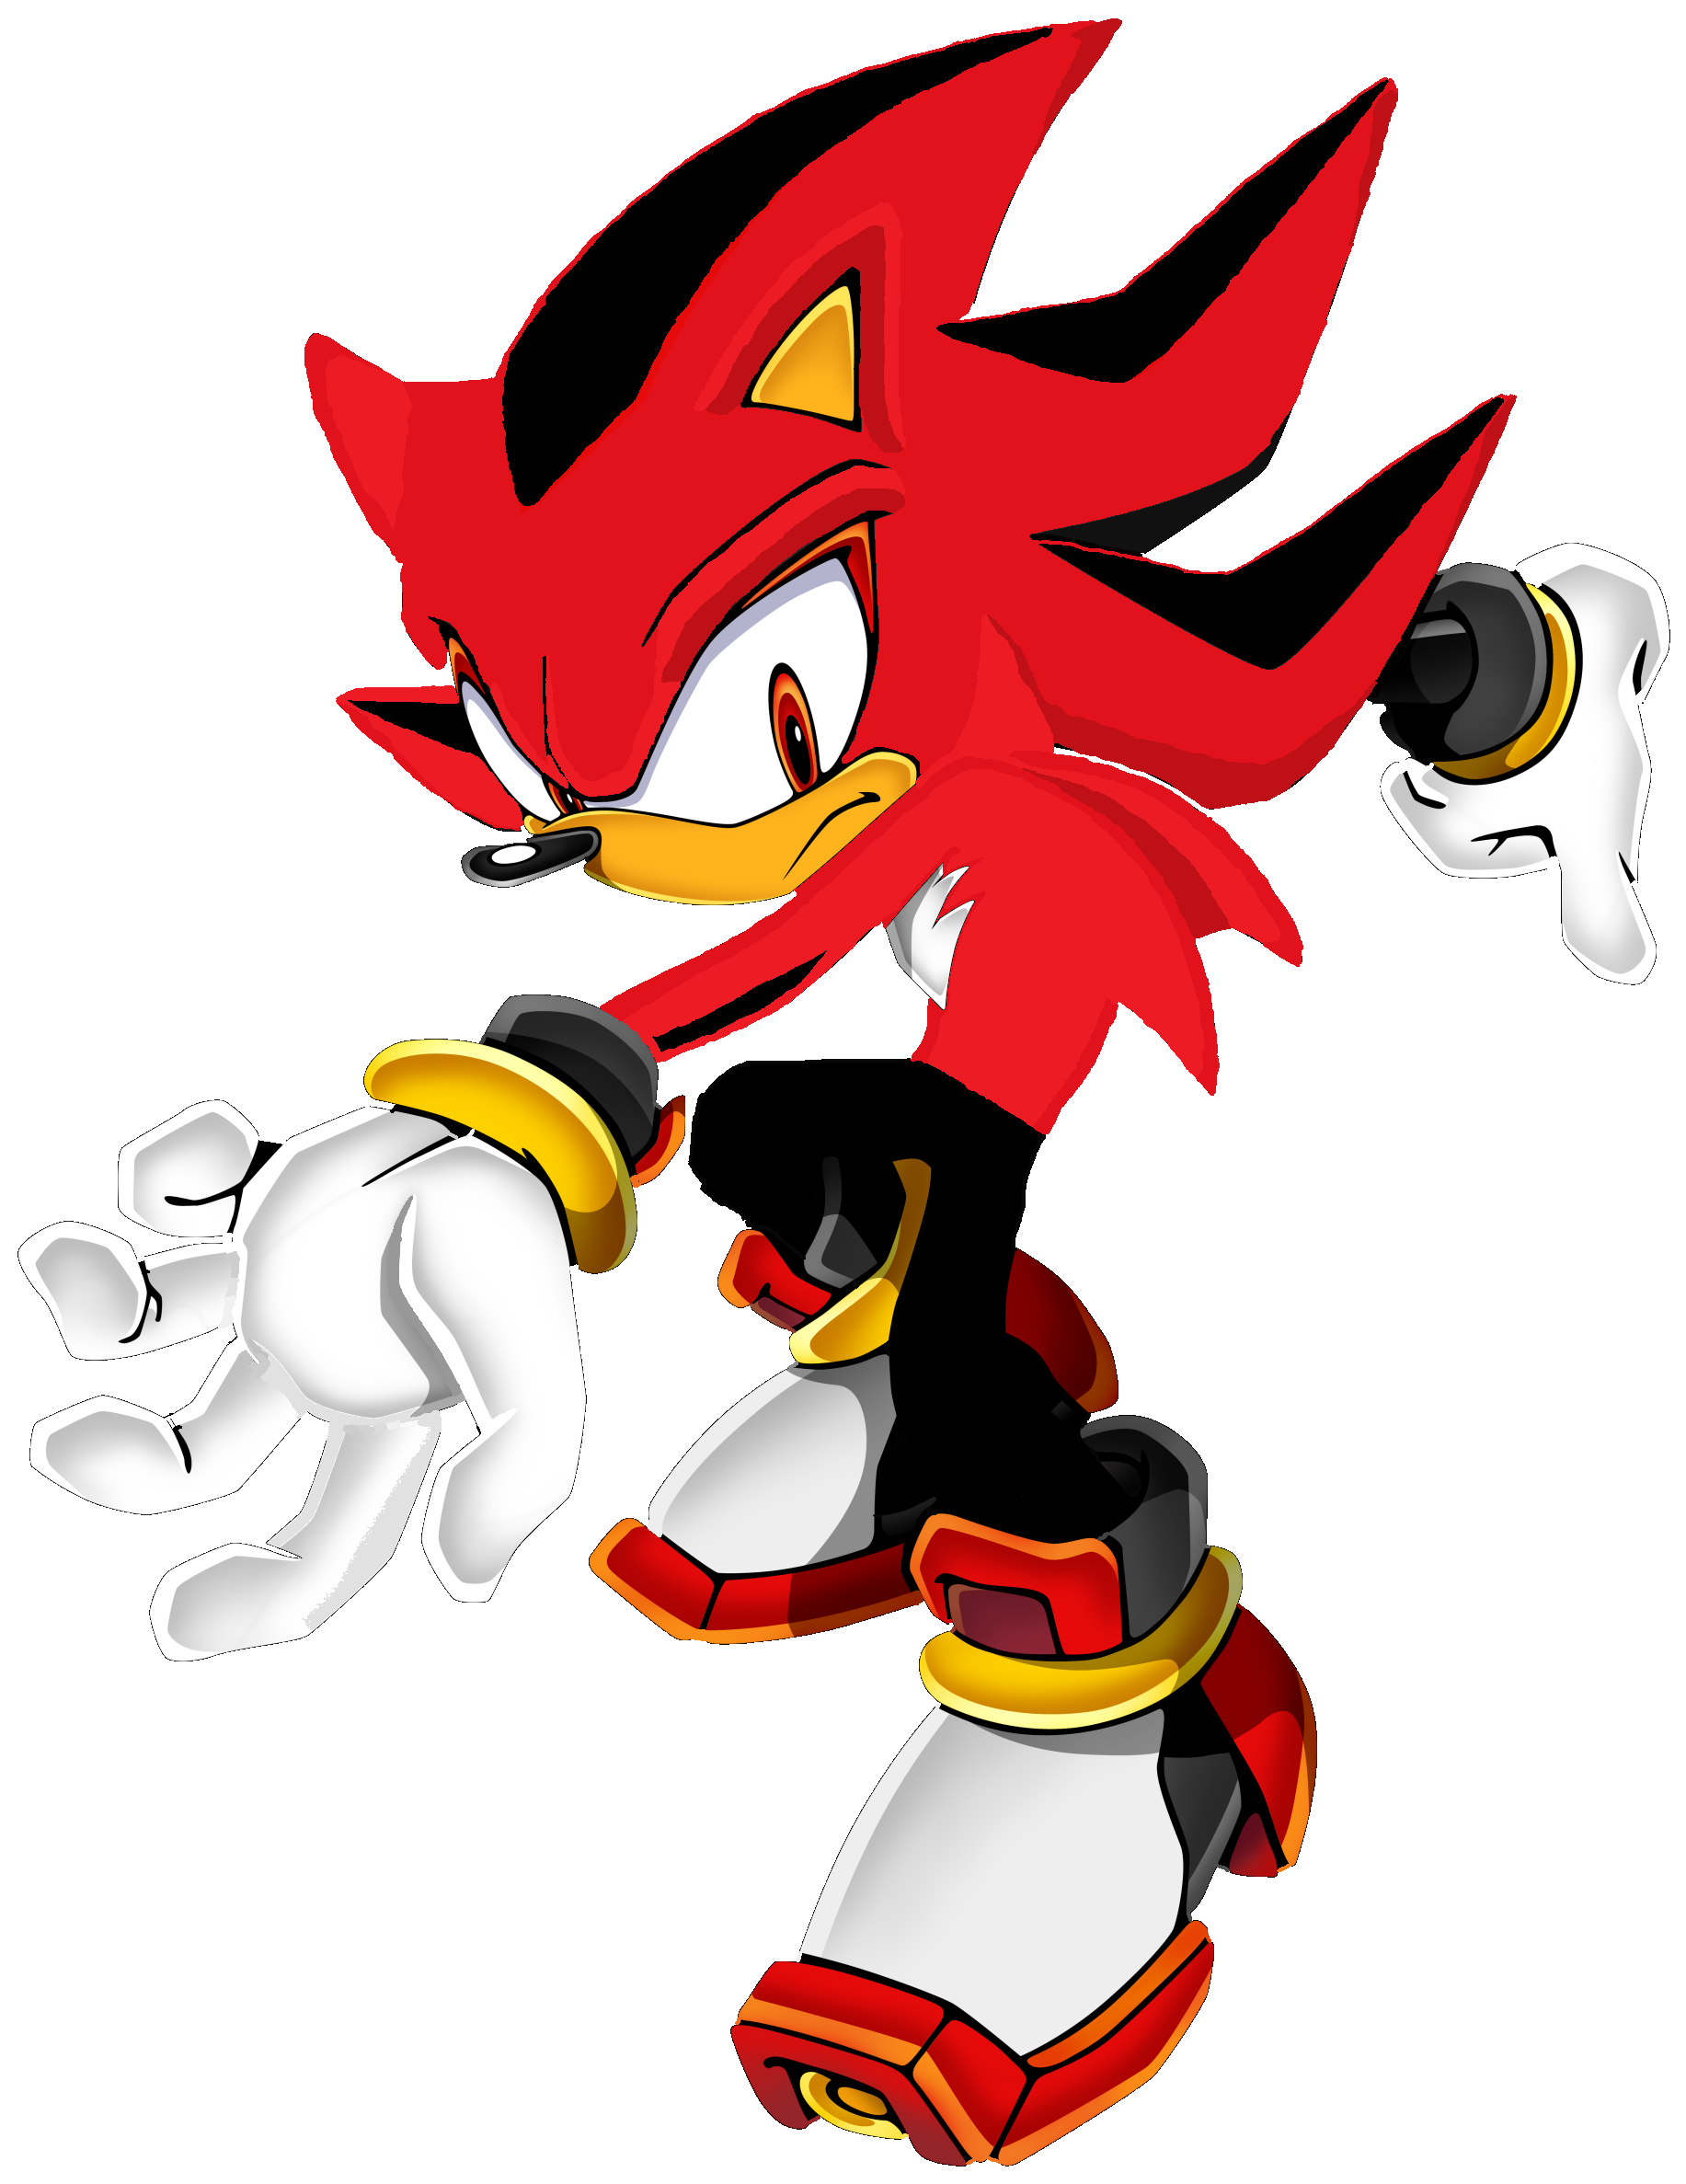 Statyx The Hedgehog Powers Abilities Sonic Fanon Wiki.